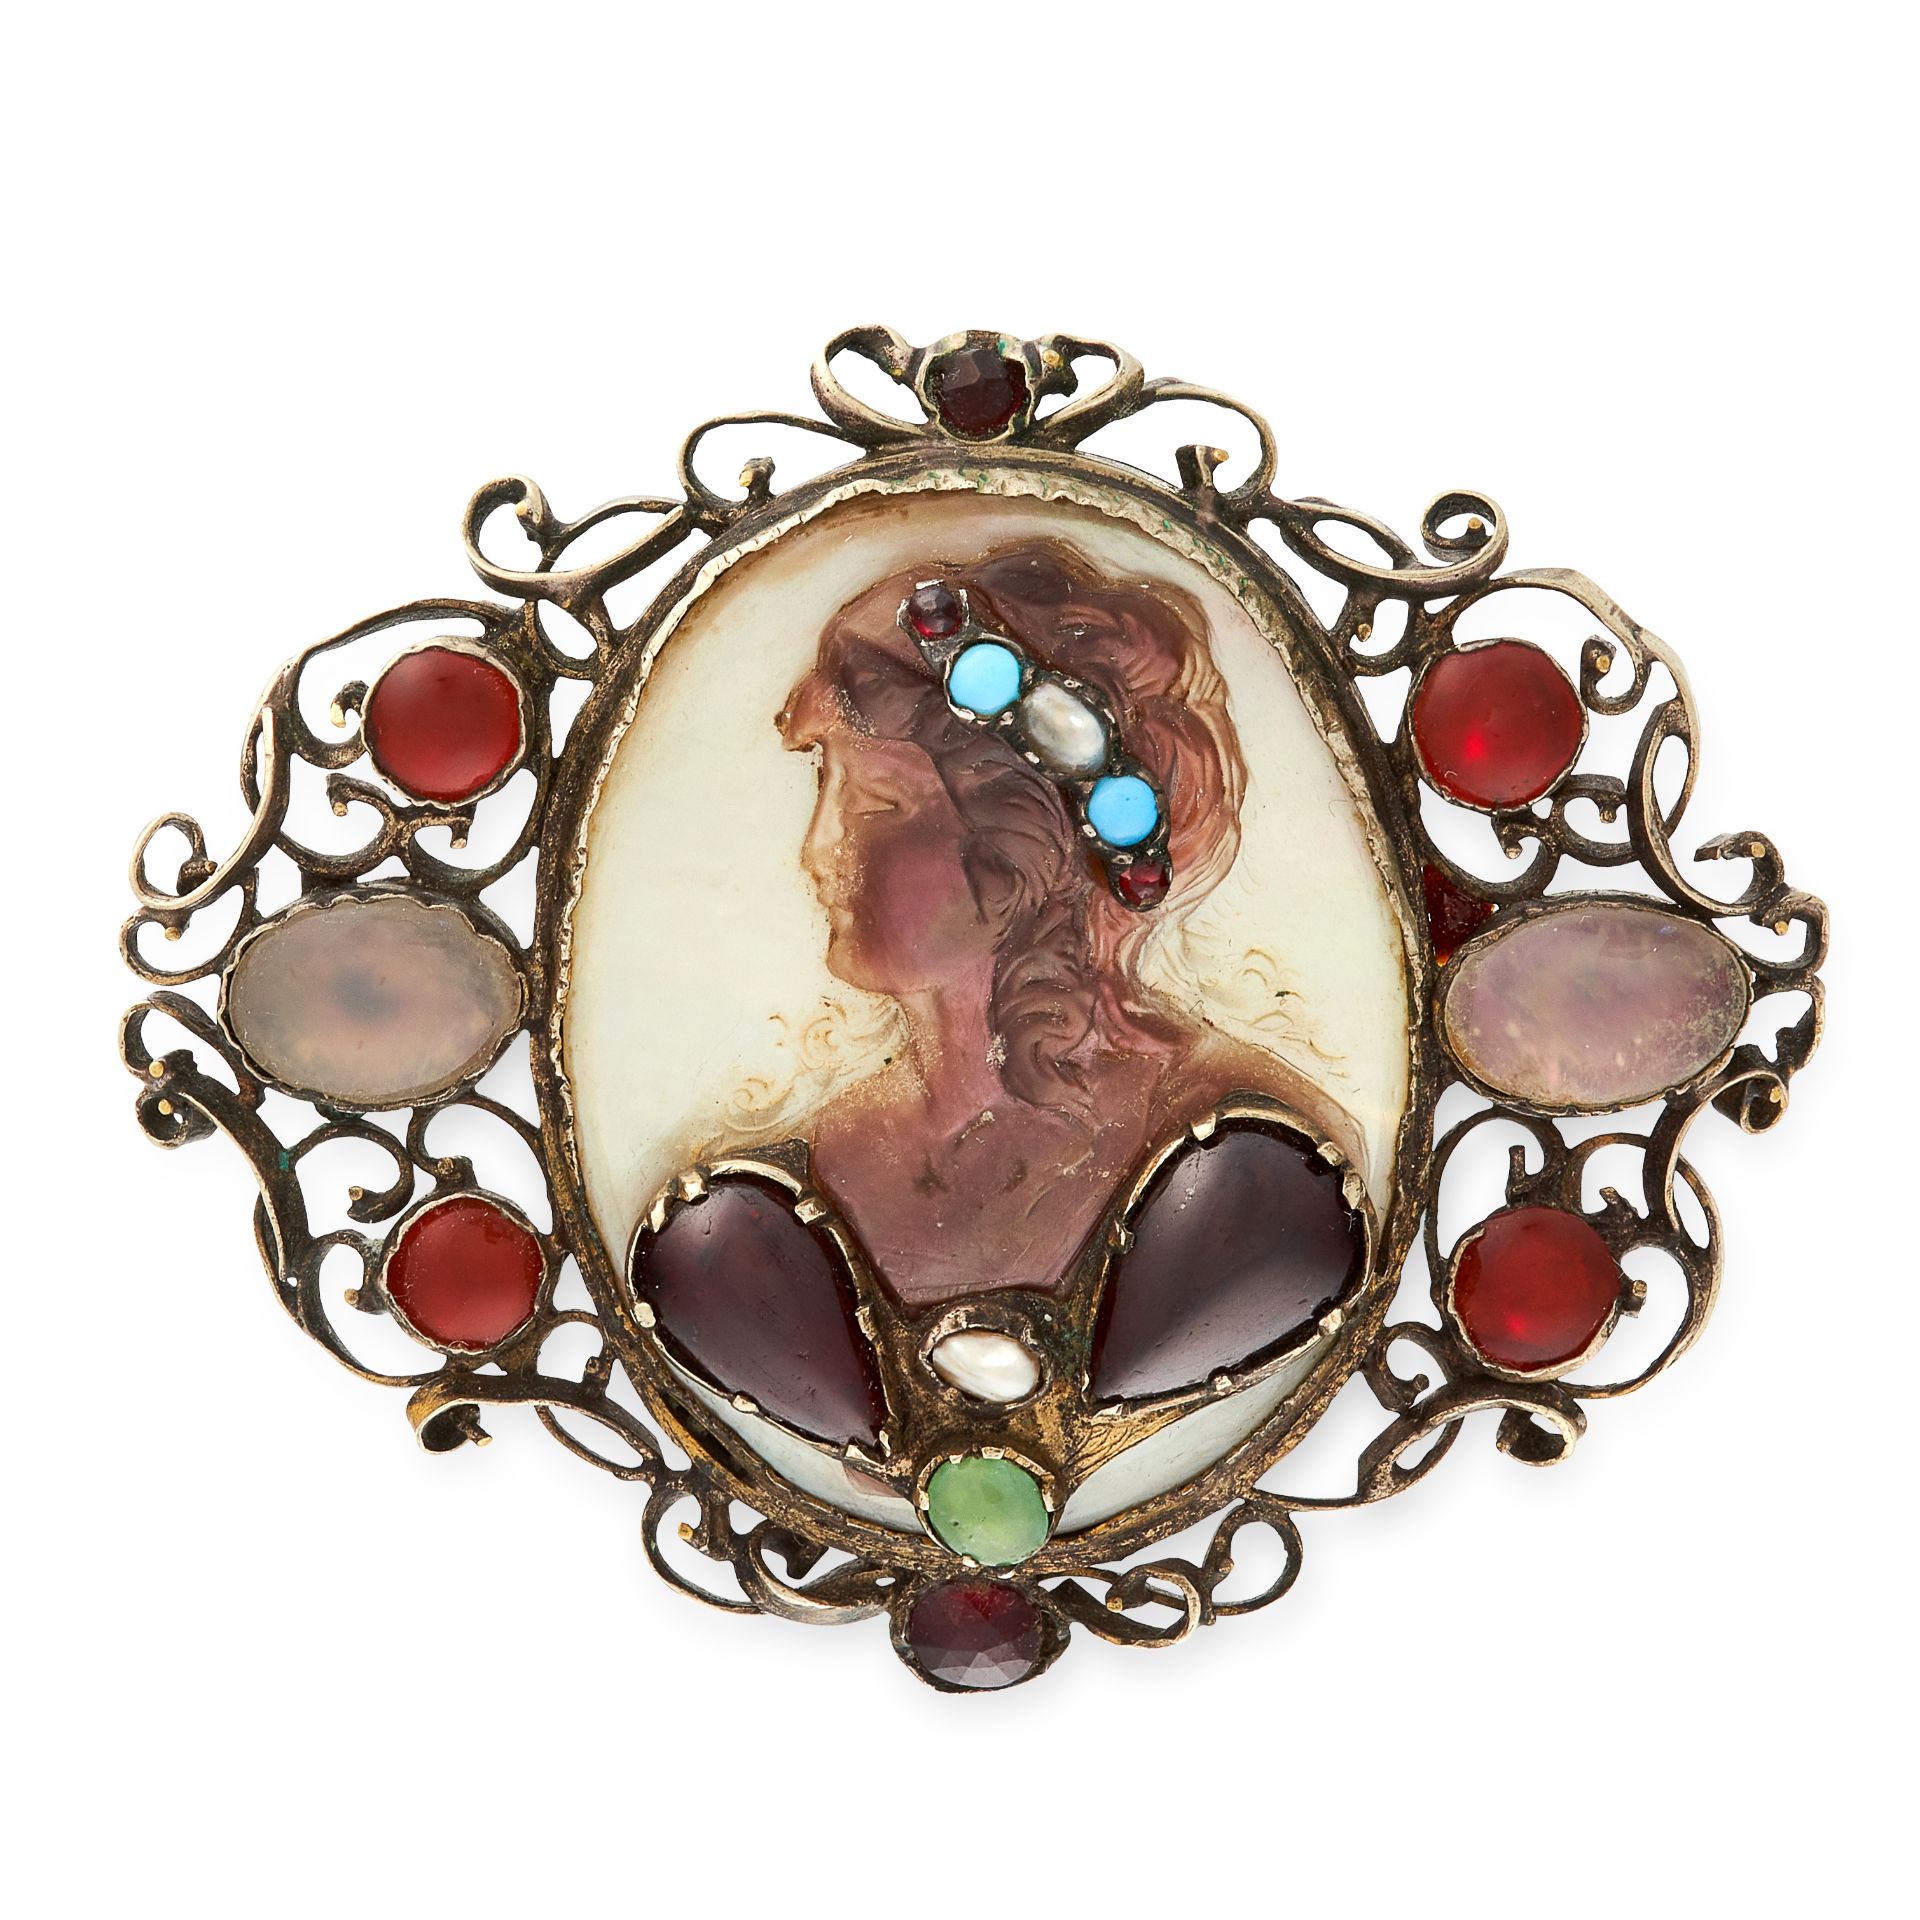 A GEMSET CAMEO BROOCH, CIRCA 1900 comprising of a mother of pearl cameo depicting a lady in a